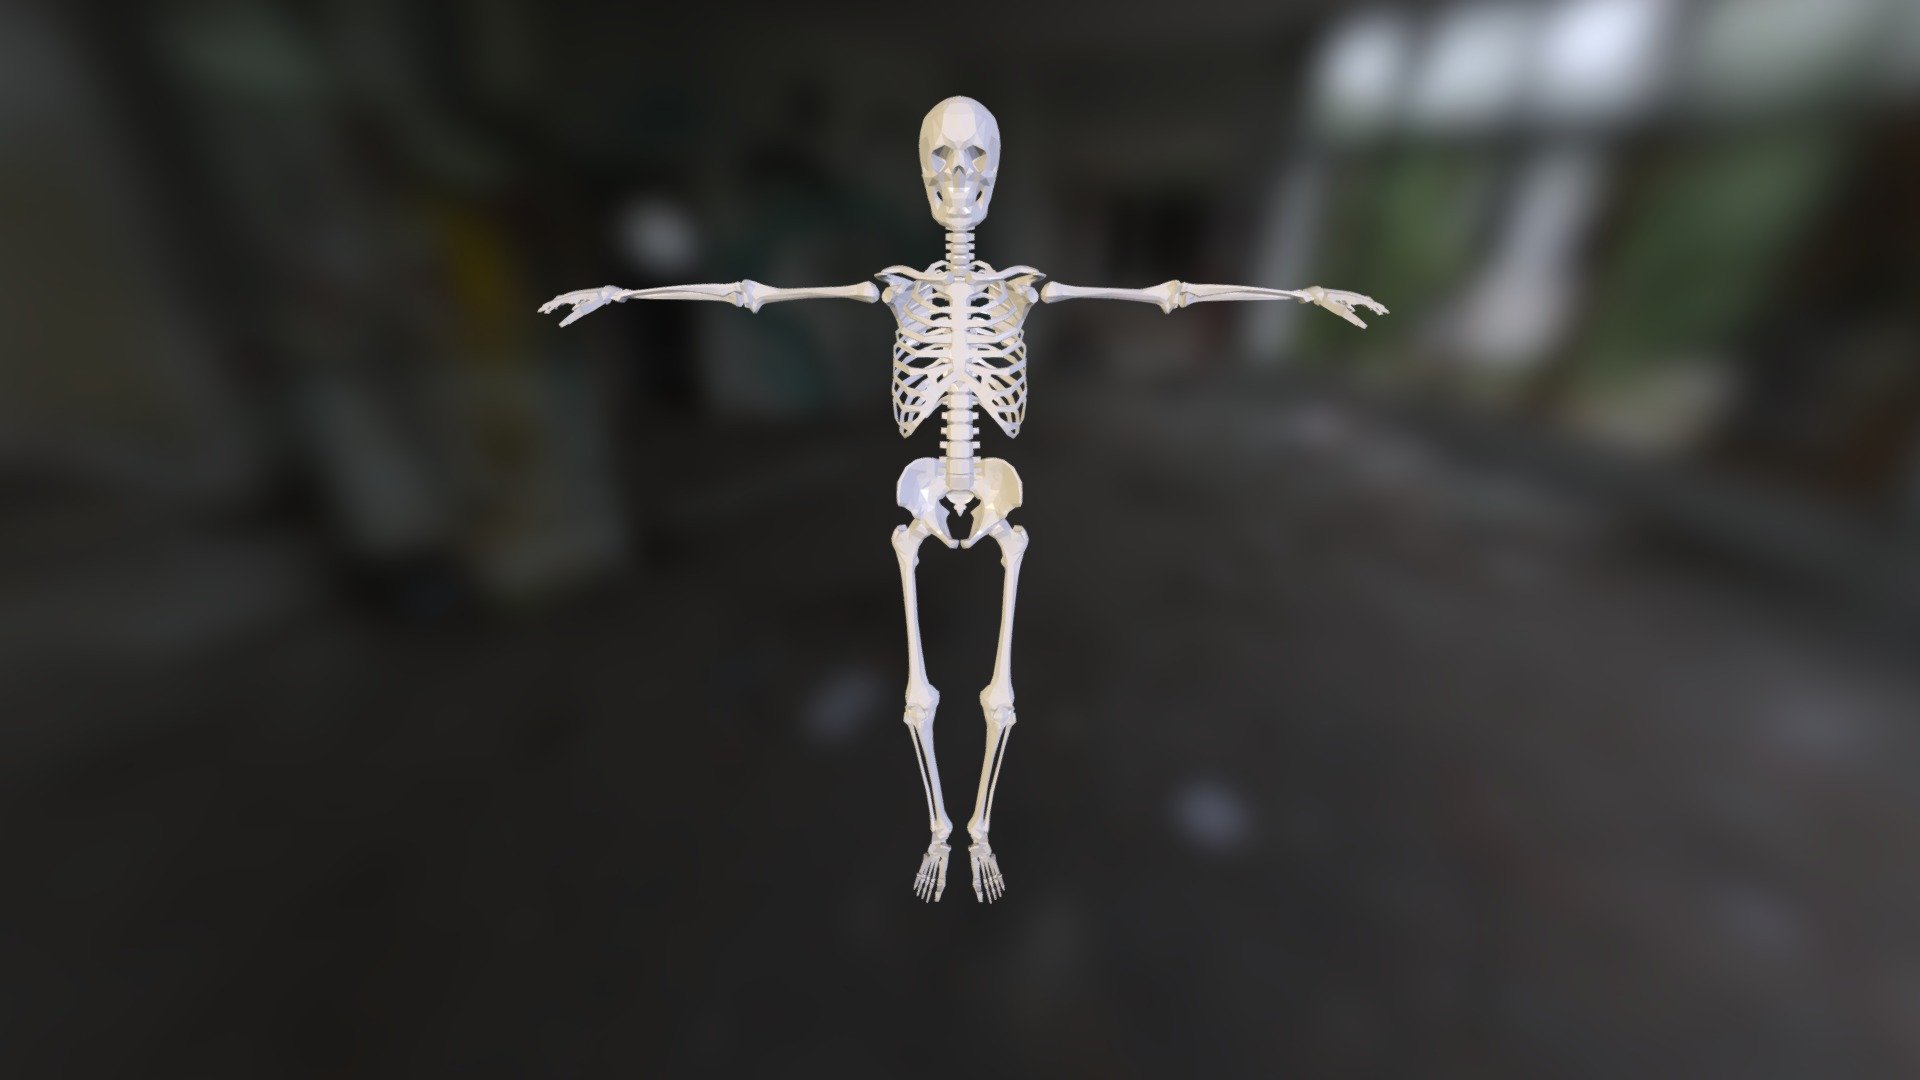 This model is featured in our Versal Courses: 
The Appendicular Skeleton - https://versal.com/c/46vno5/learn
Animal Structure and Function - https://versal.com/c/bpurlf/learn

Explore our courses to discover more about the skeletal system.  - Human Skeleton - 3D model by Versal 3d model